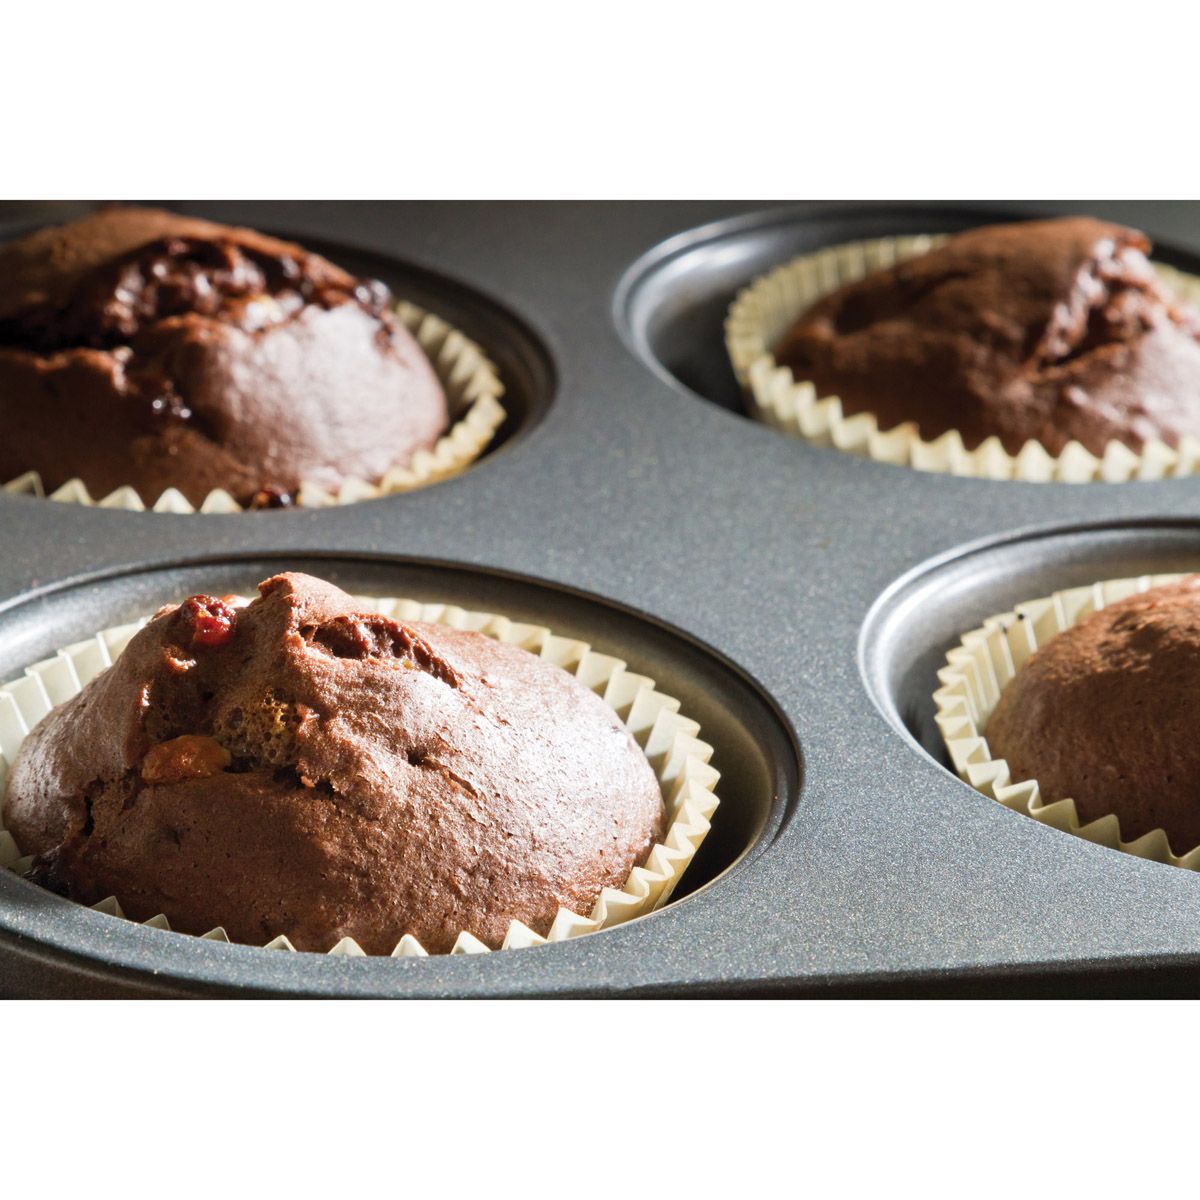 Mrs Anderson Silicone 12-Cup Muffin Pan